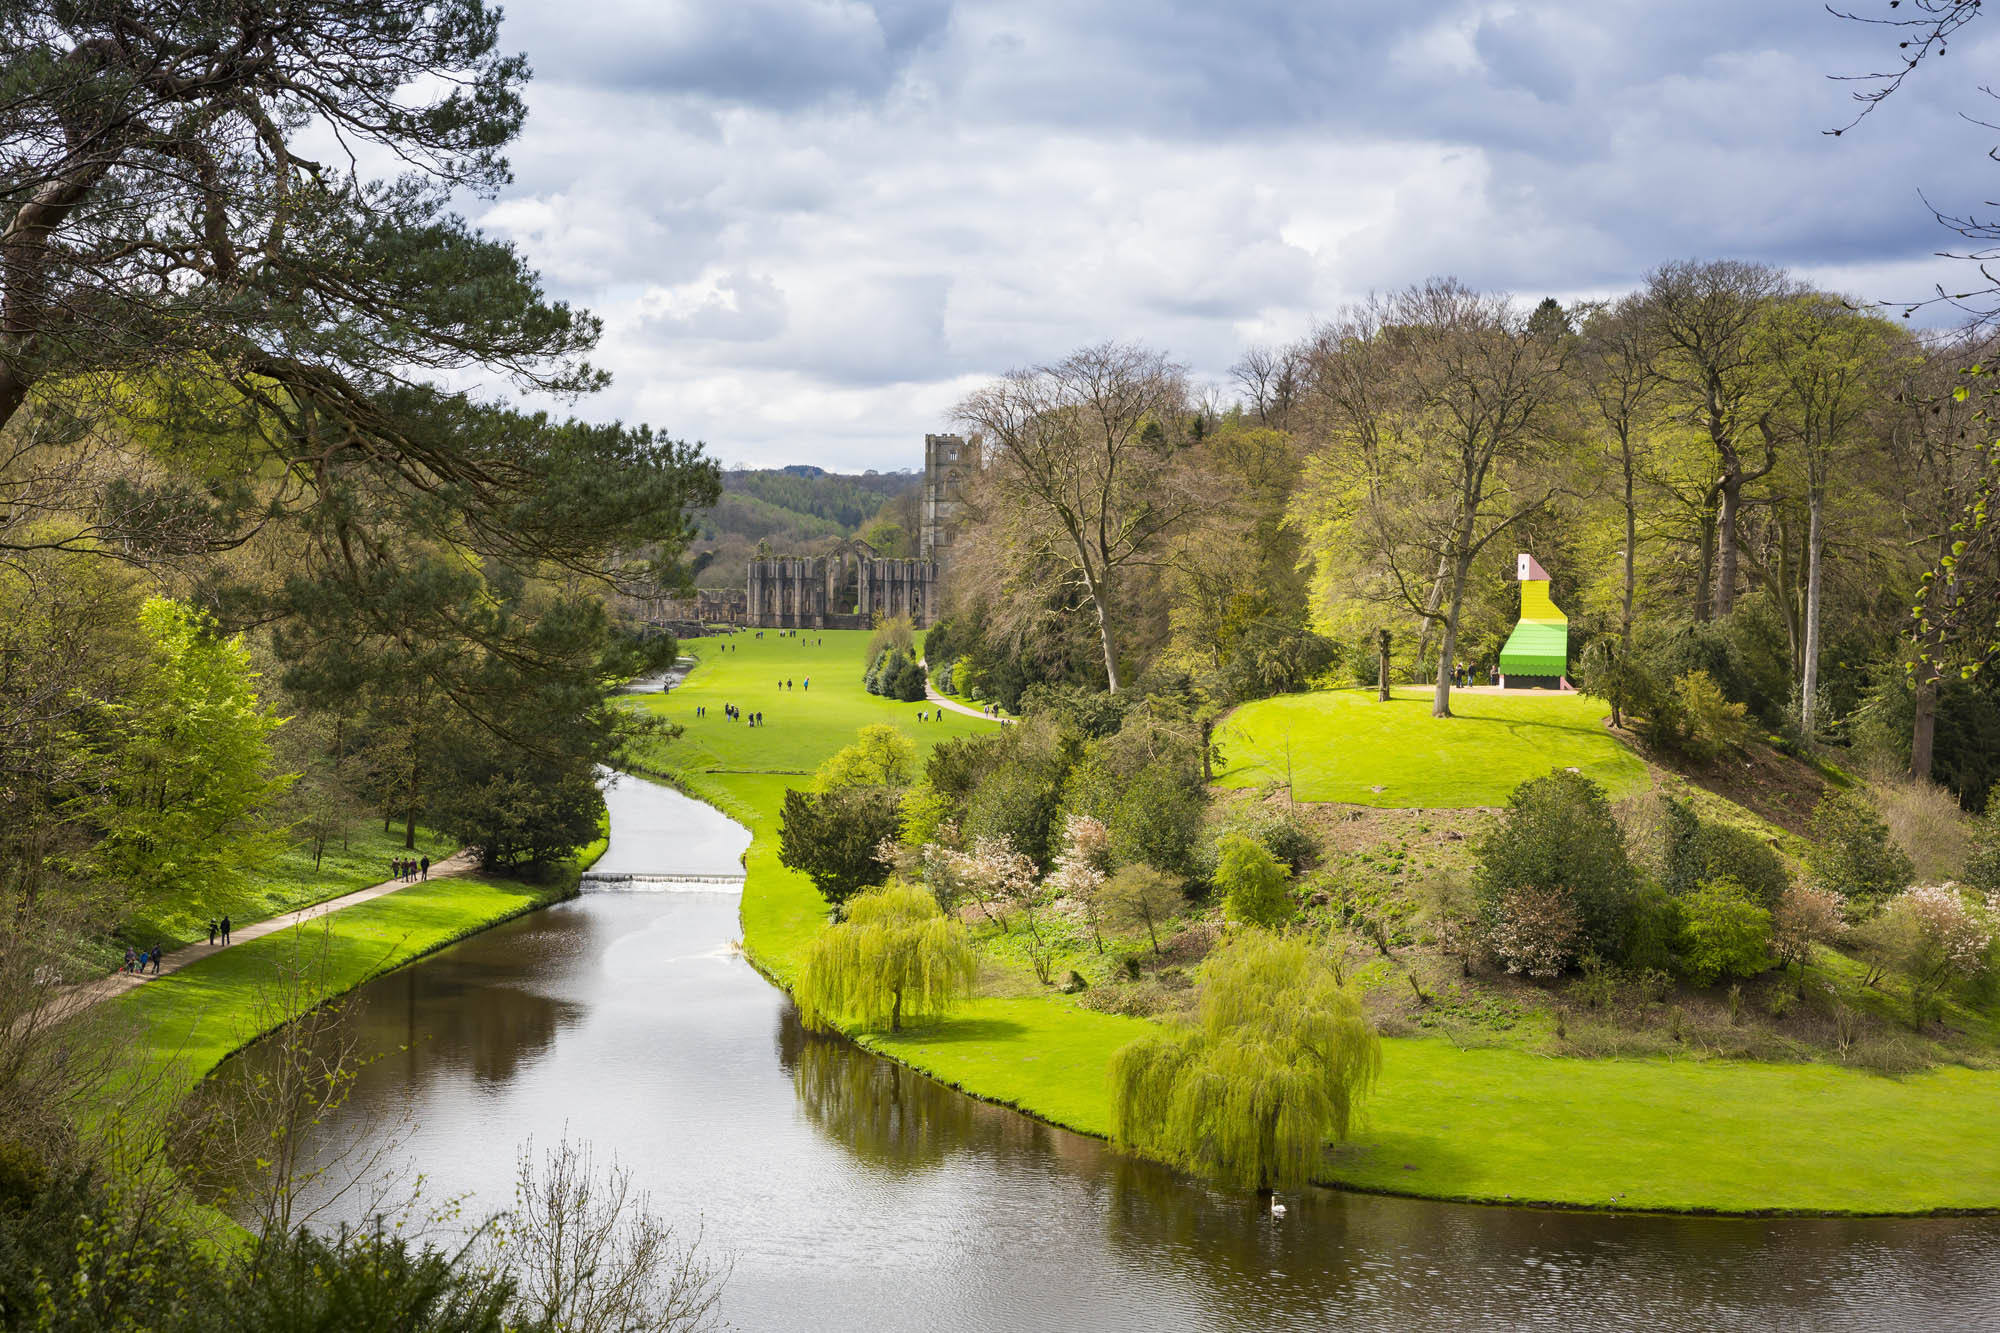 1_Charles_Holland_at_Fountains_Abbey._Image_credit_Chris_Lacey__6.jpg